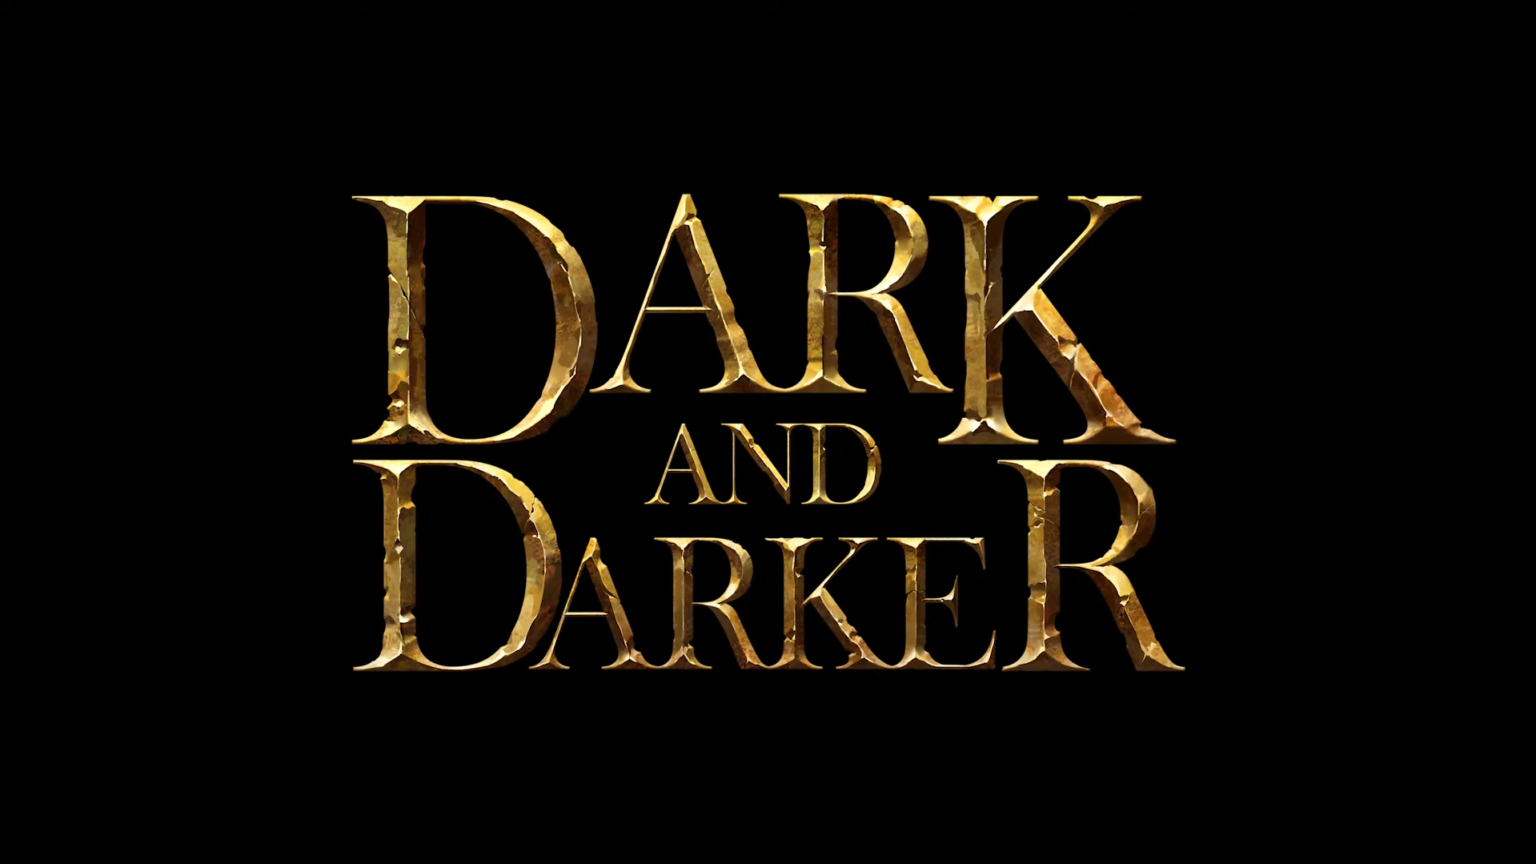 Dark and Darker teases potential Early Access launch sooner than